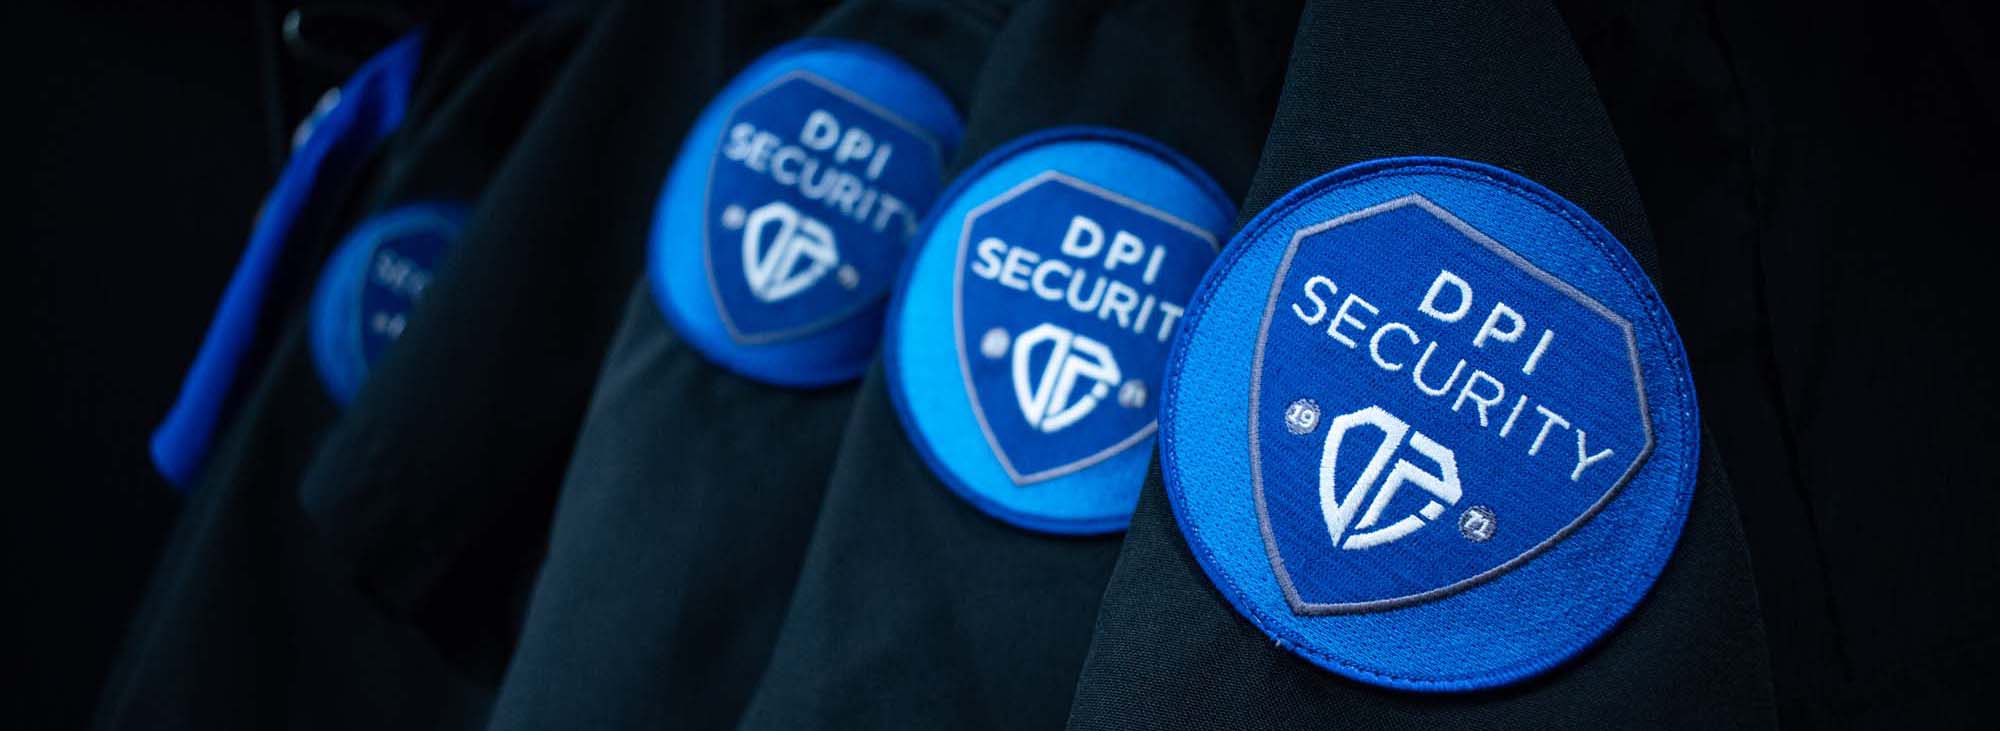 DPI Security patches on dark blue jacket background